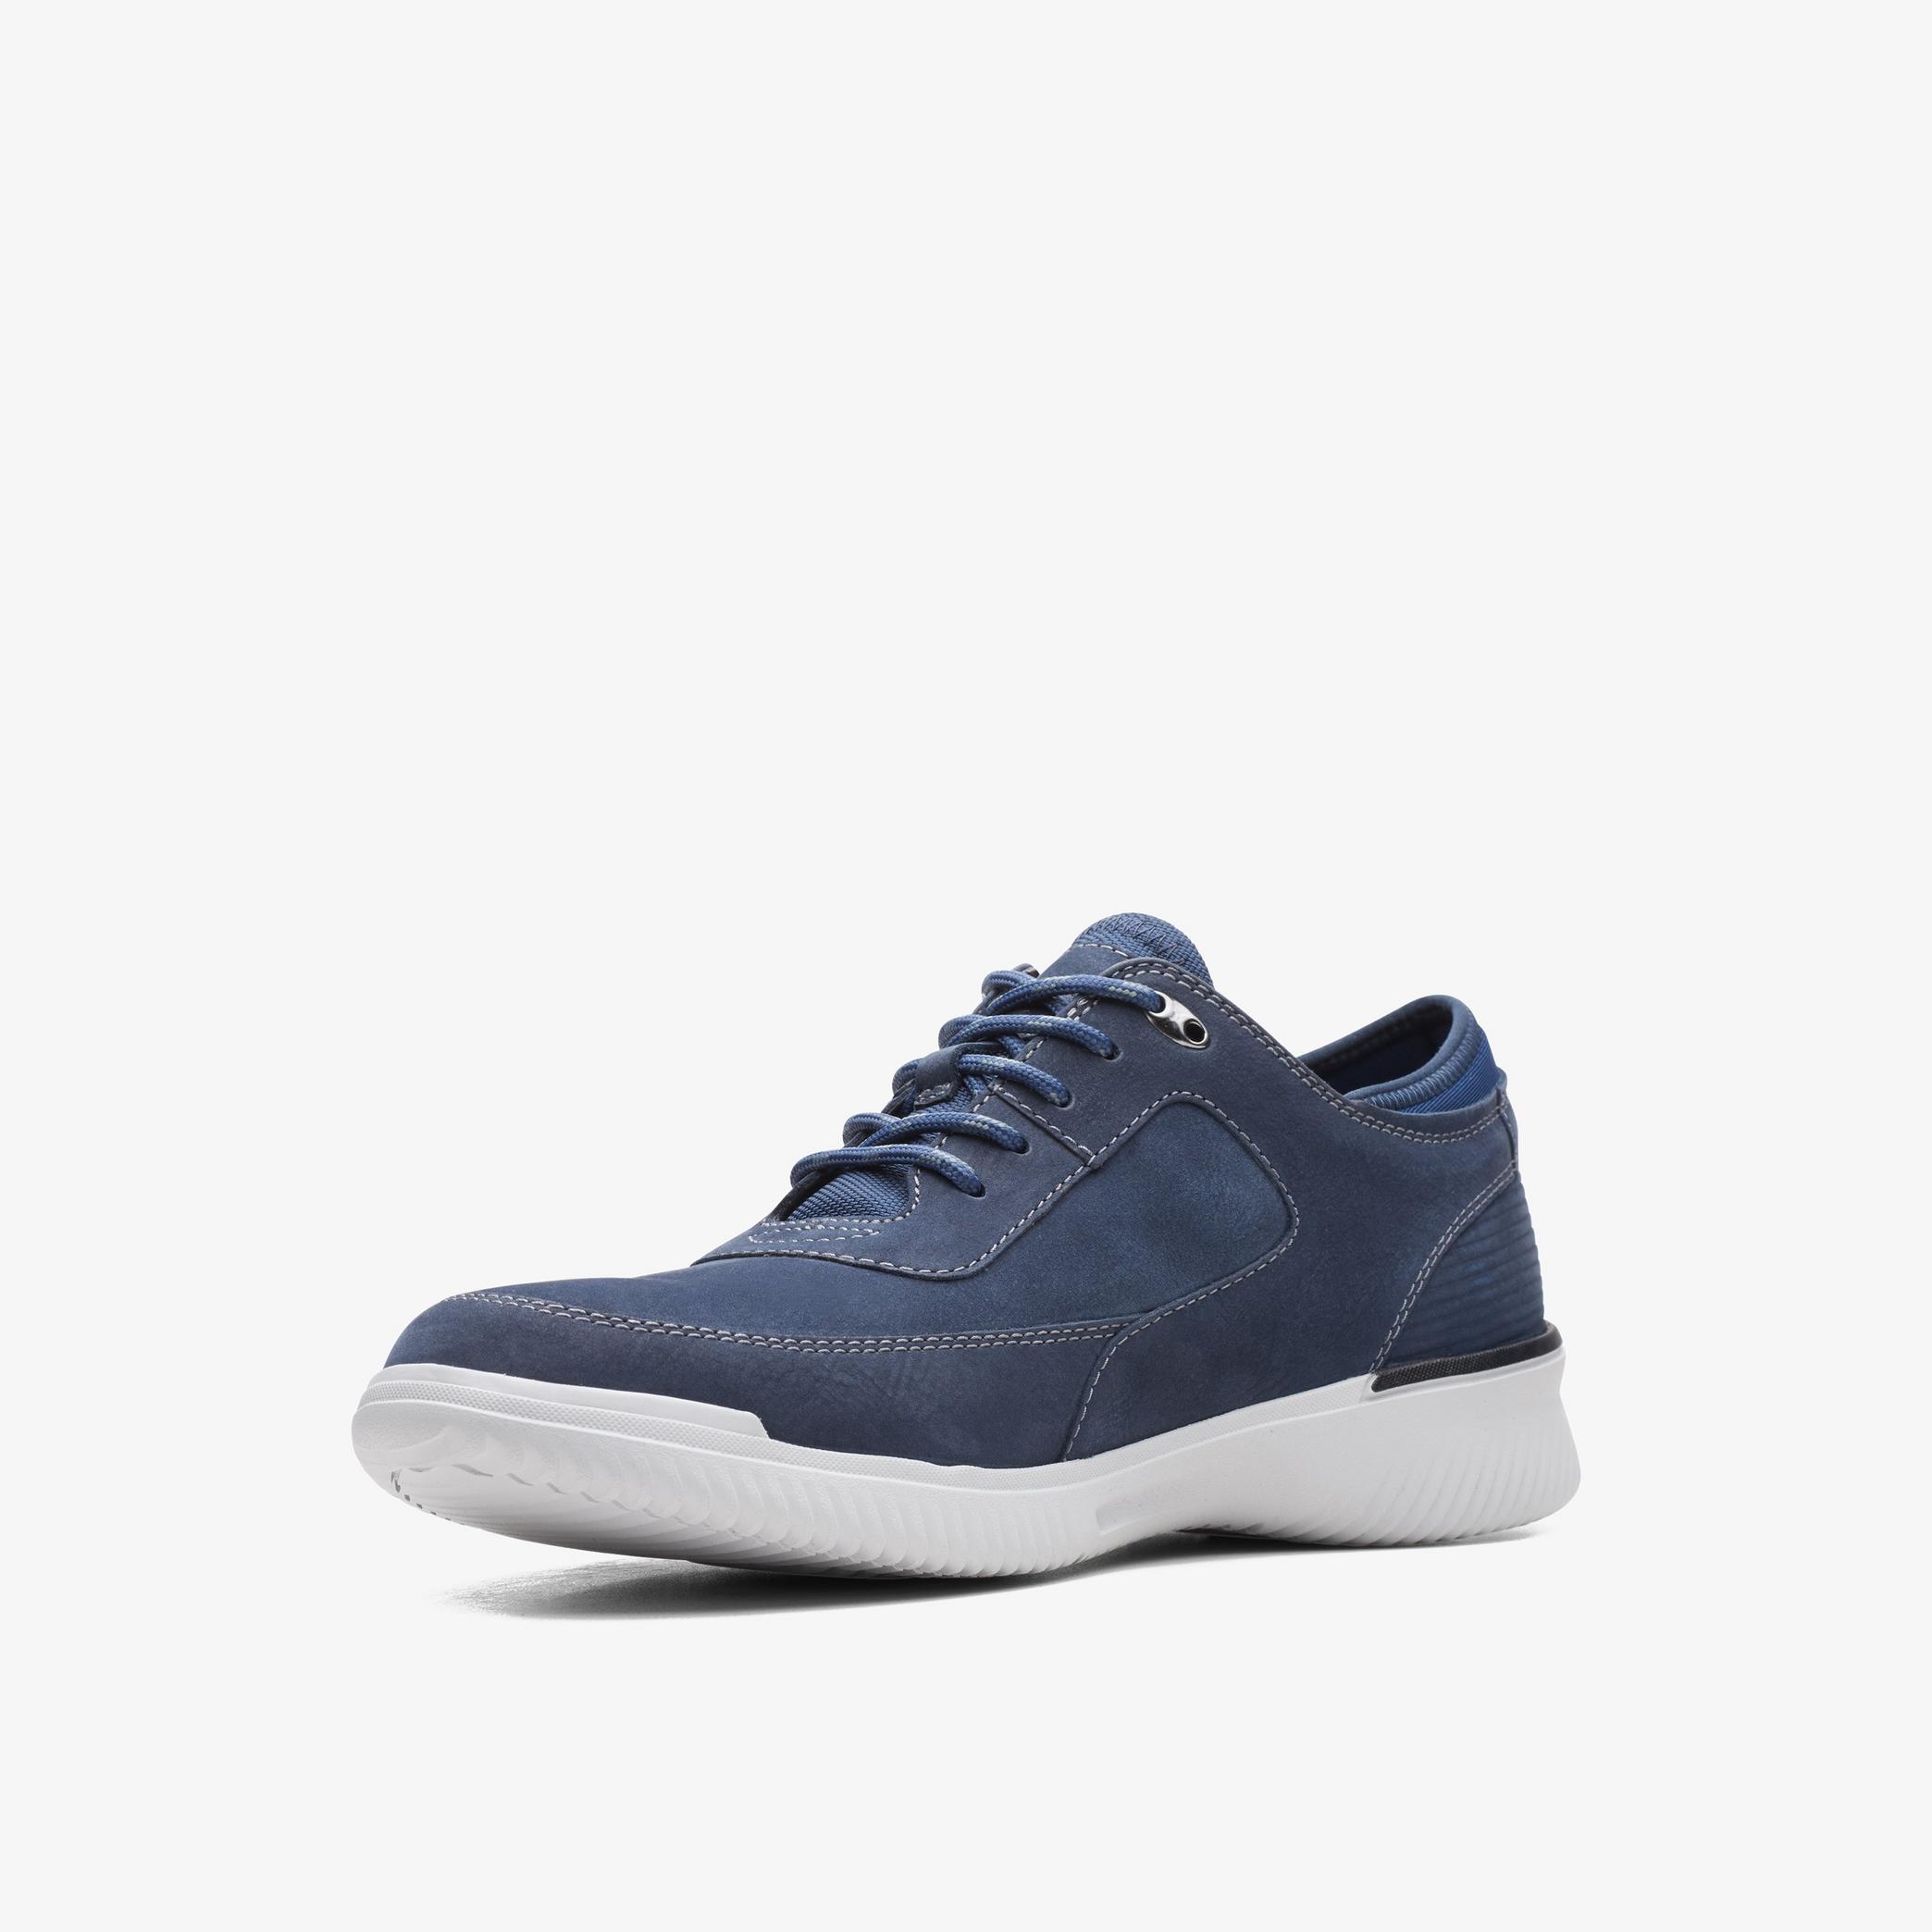 Donaway Lace Navy Nubuck Shoes, view 4 of 6